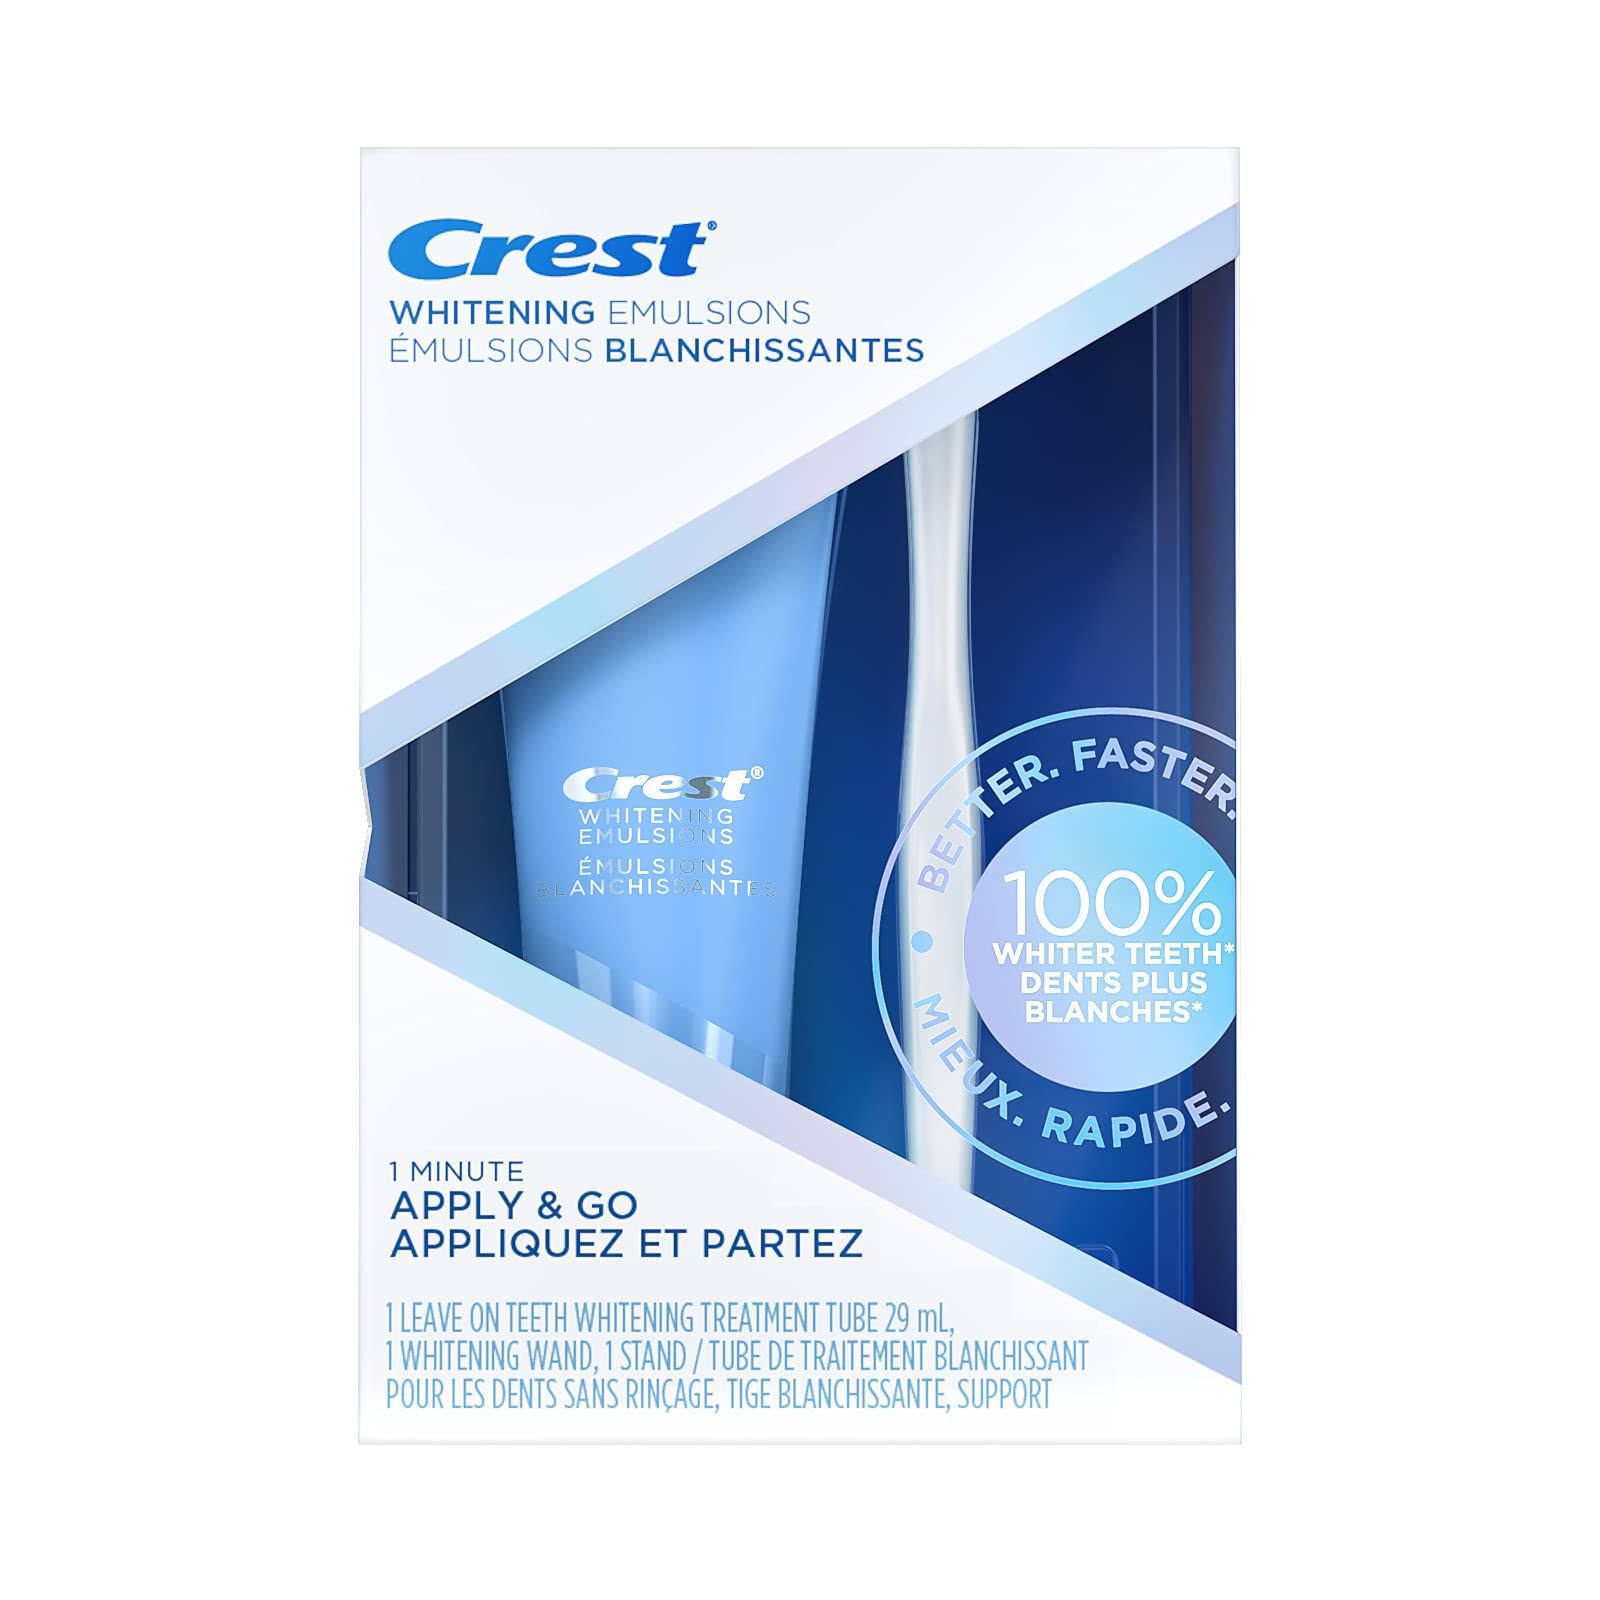 CREST Whitening Emulsions With Wand Applicator, Apply & Go Teeth Whitening, 29 Ml